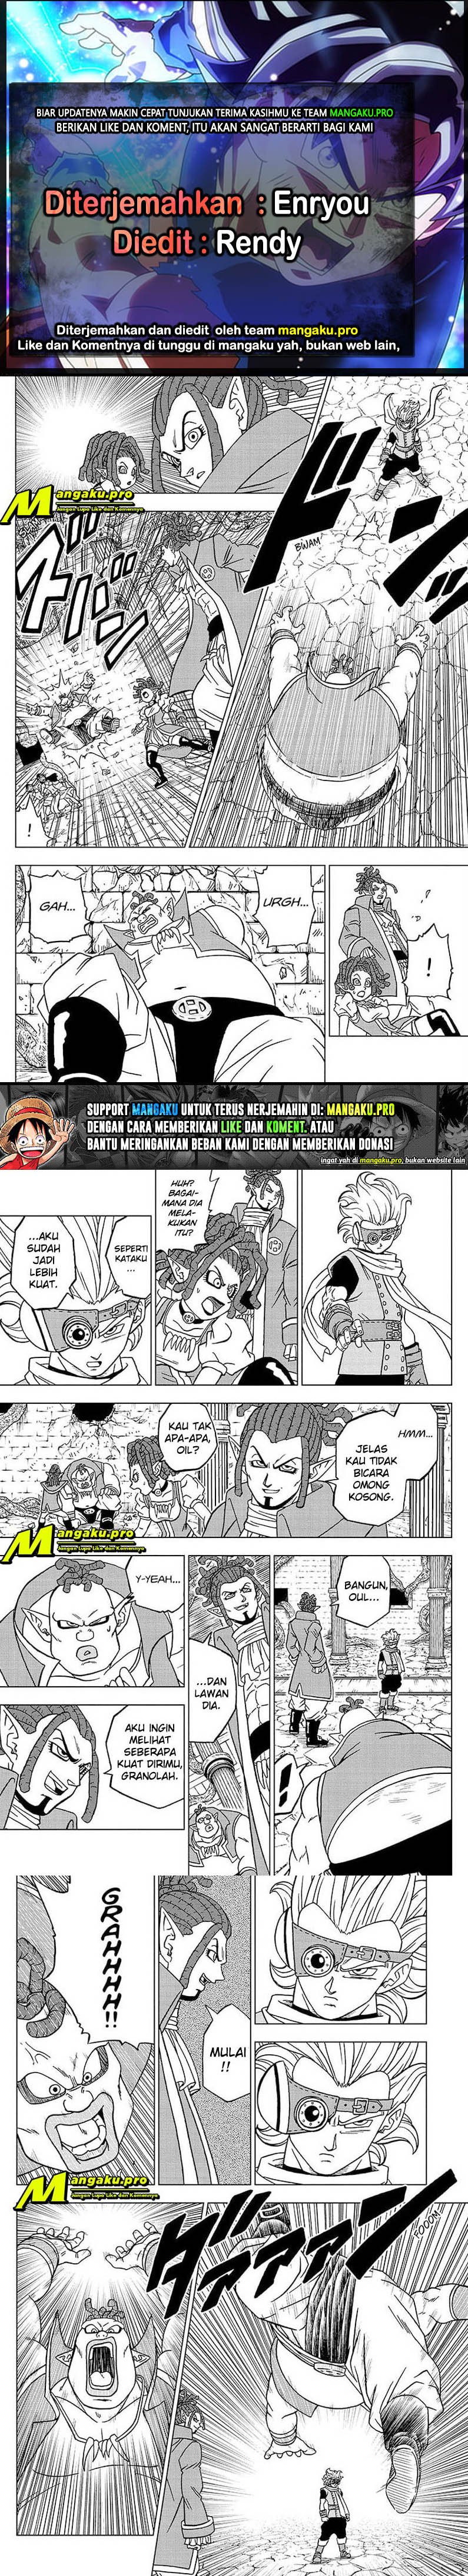 Dragon Ball Super: Chapter 70.2 - Page 1